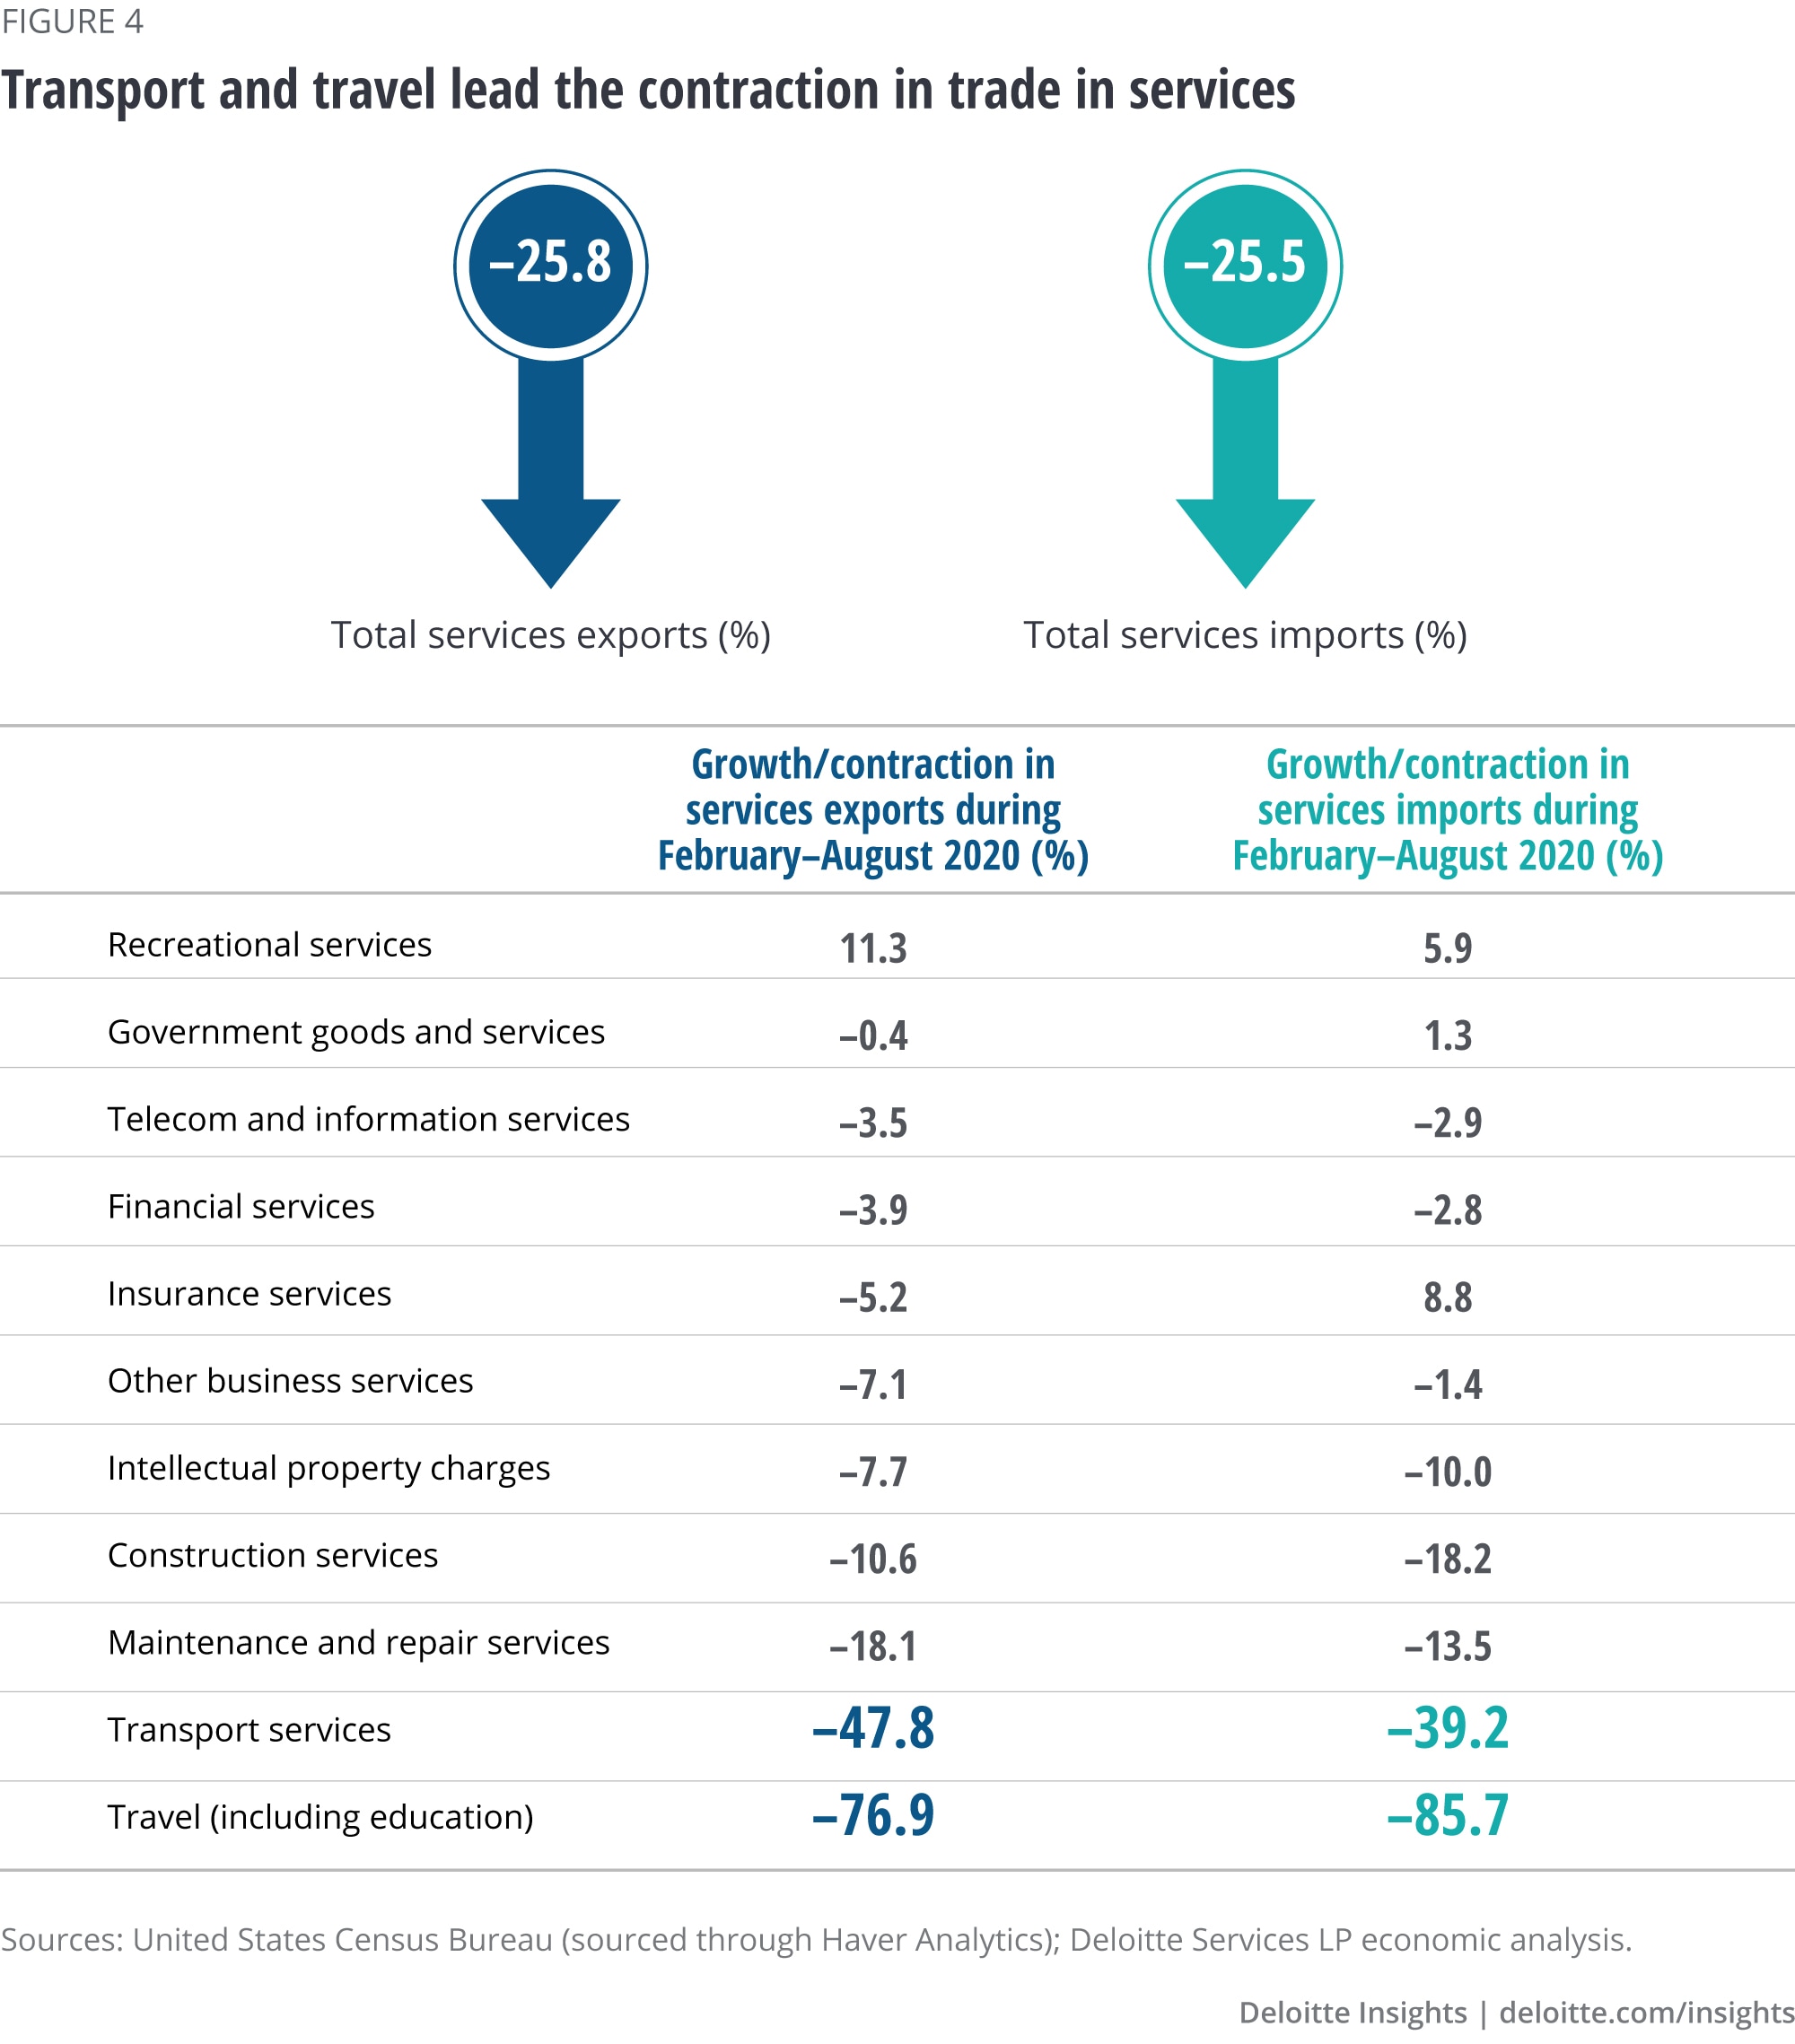 Transport and travel lead the contraction in trade in services